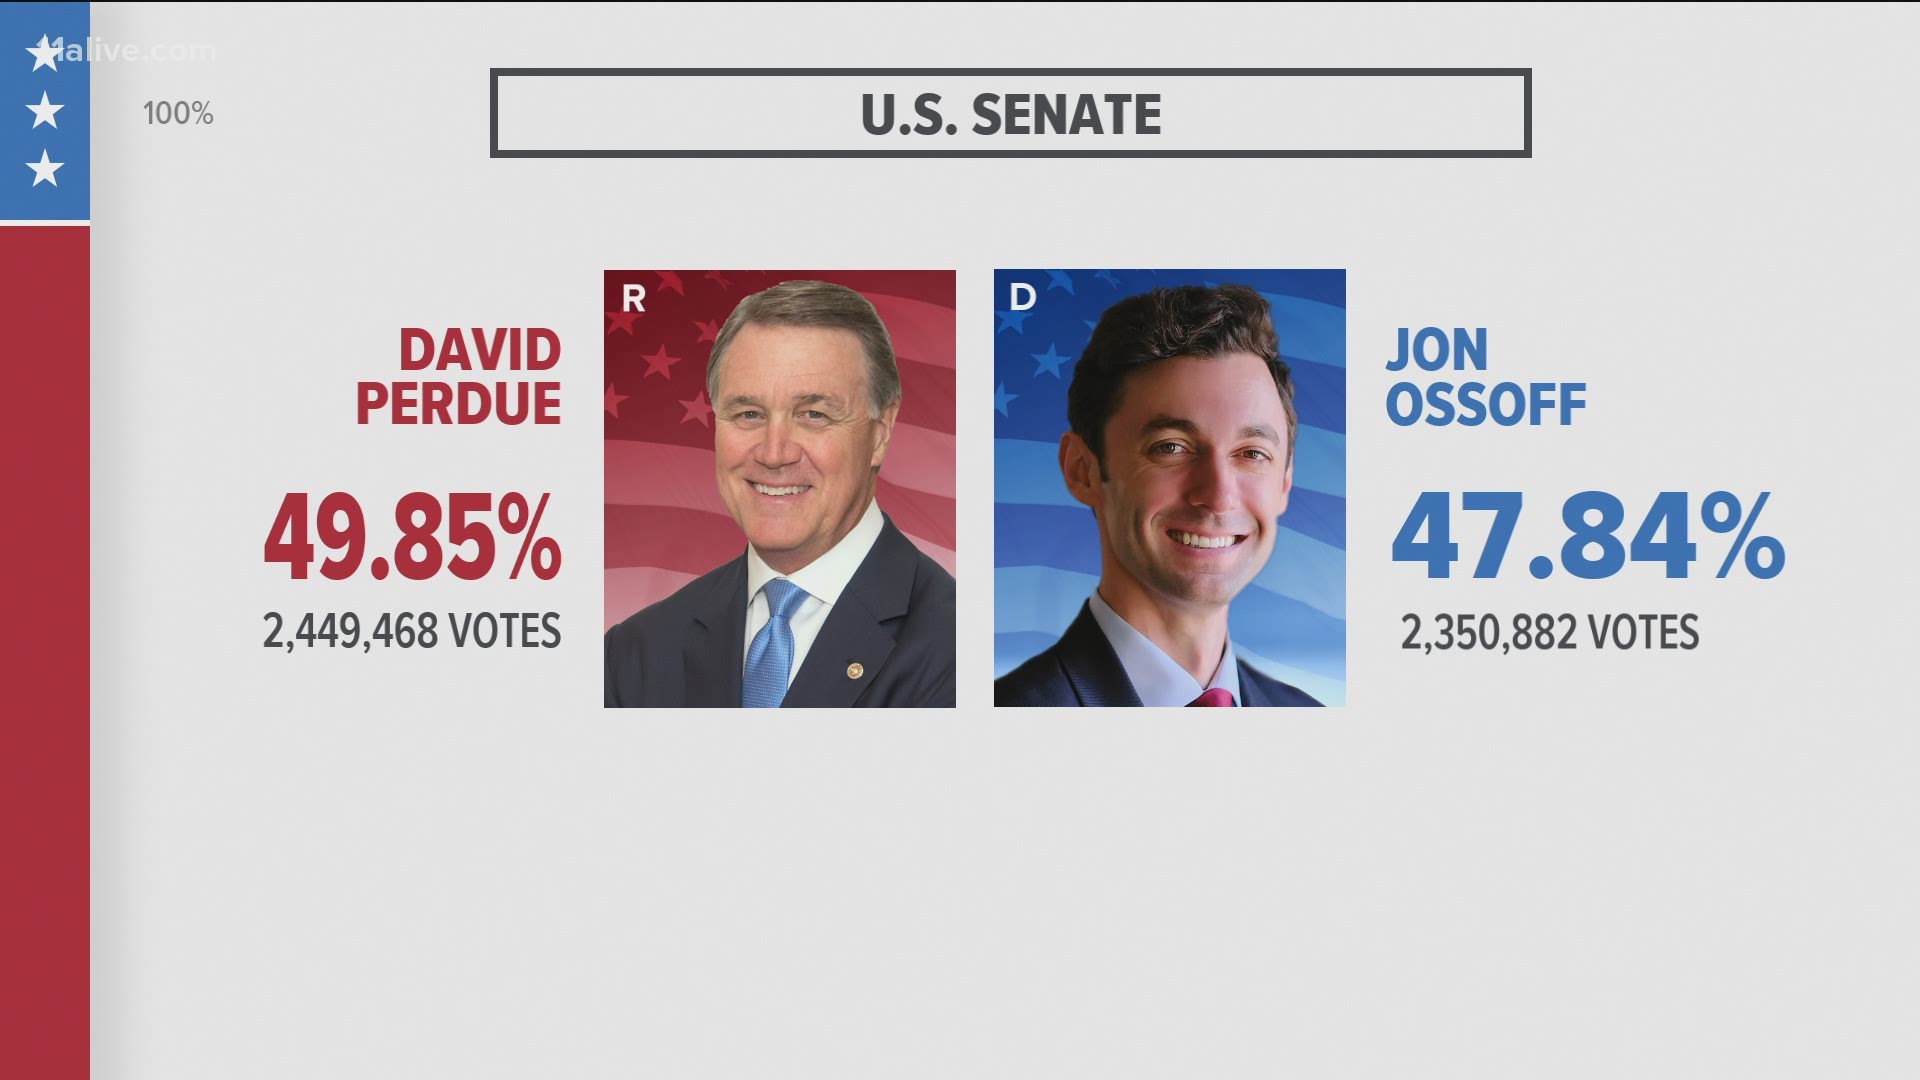 The senate race for Sen. David Perdue's seat could go for a runoff after Perdue fell below 50 percent of the vote. His opponent Jon Ossoff is also below 50 percent.